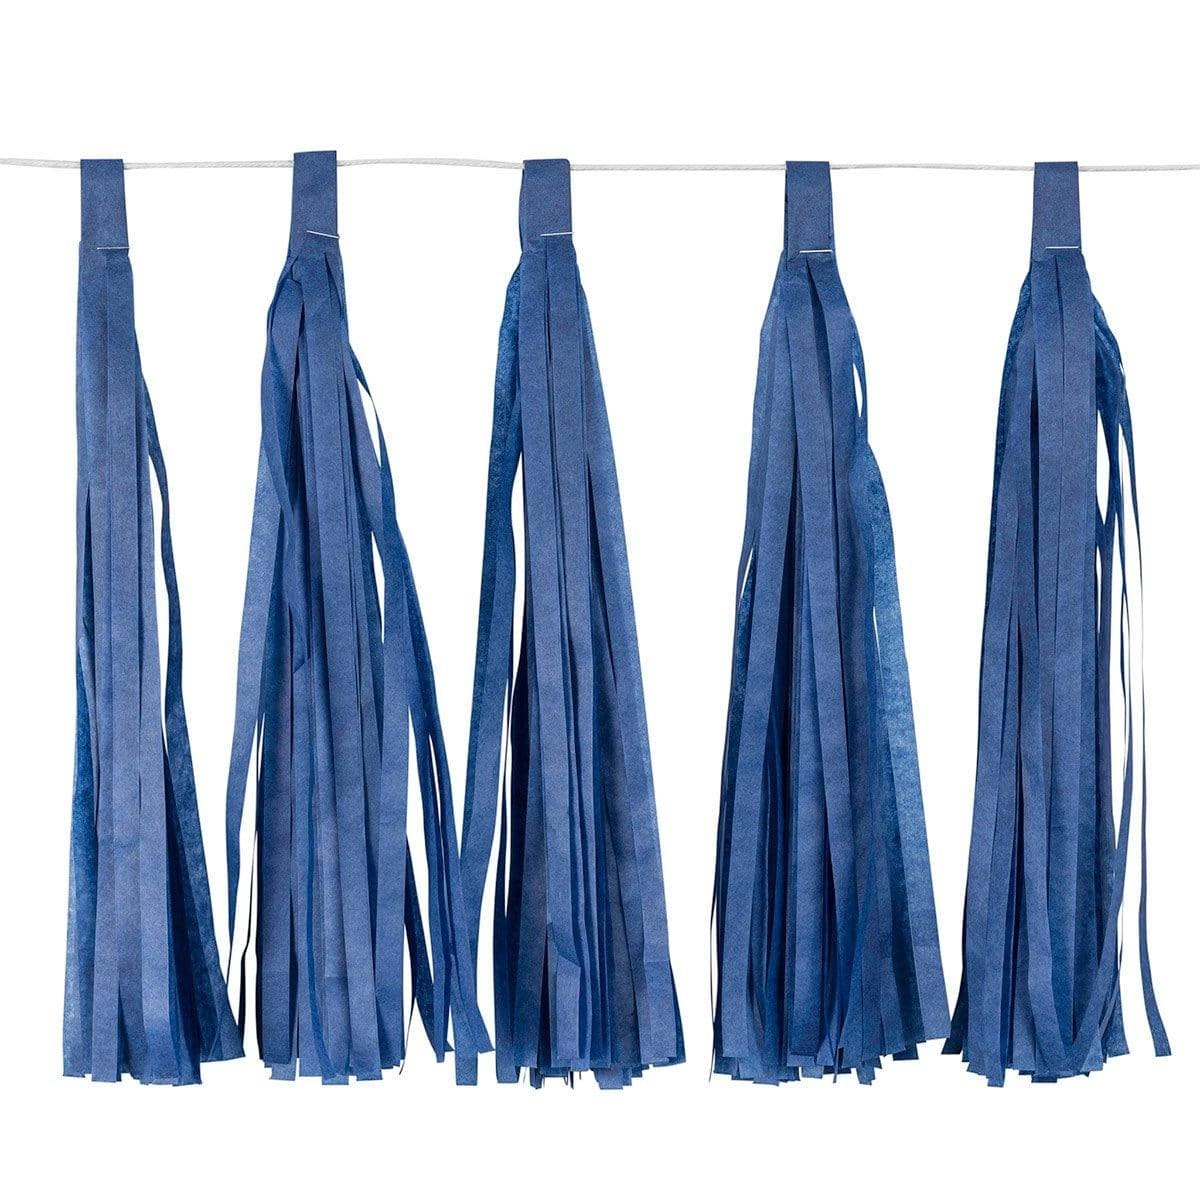 Buy Decorations Tassels Garland Silk Paper Assembled 10/Pkg - Royal Blue sold at Party Expert